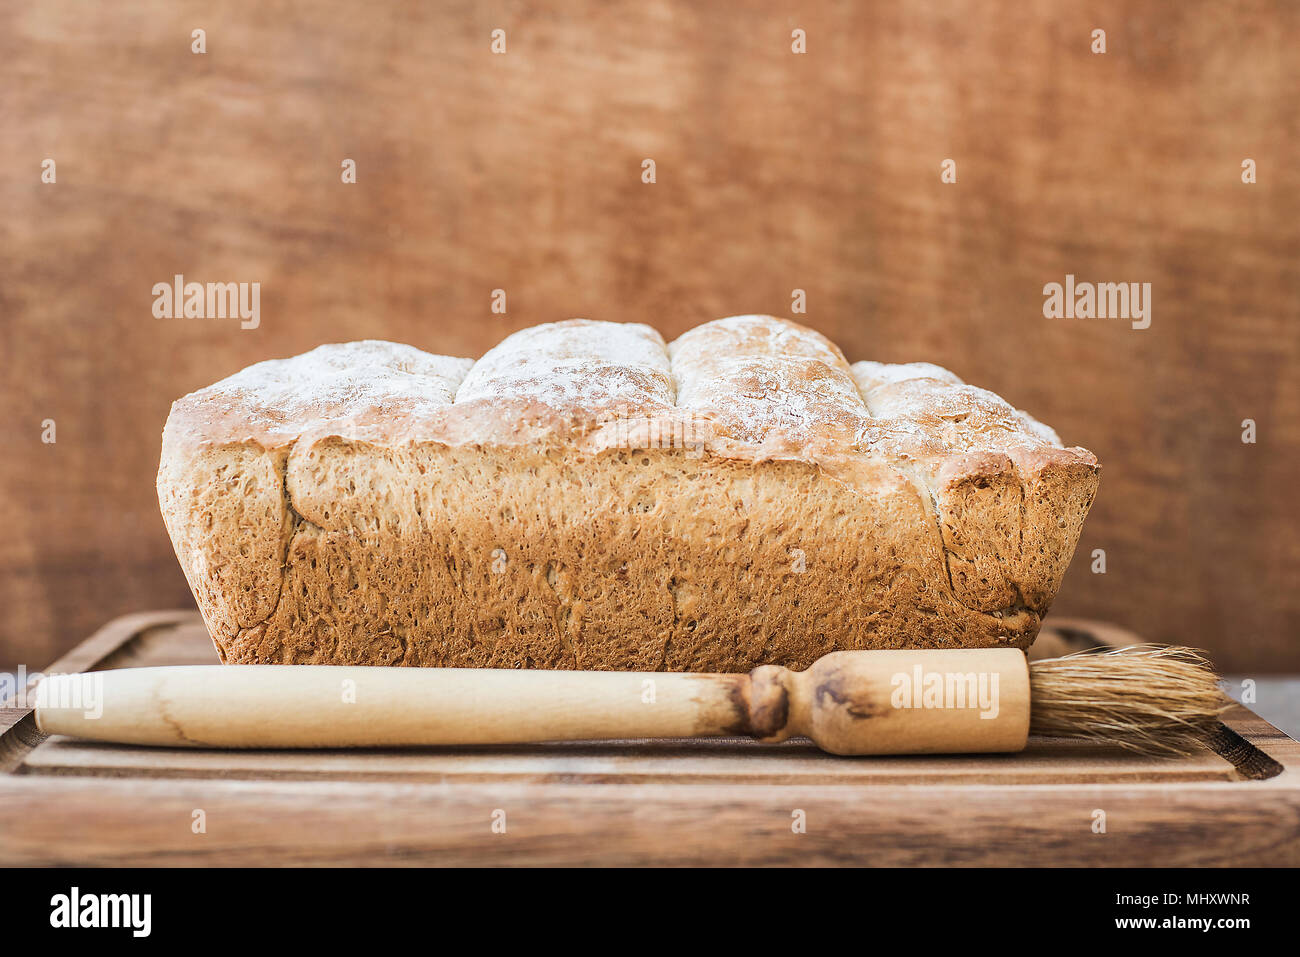 Freshly baked loaf of whole wheat bread on wooden surface Stock Photo